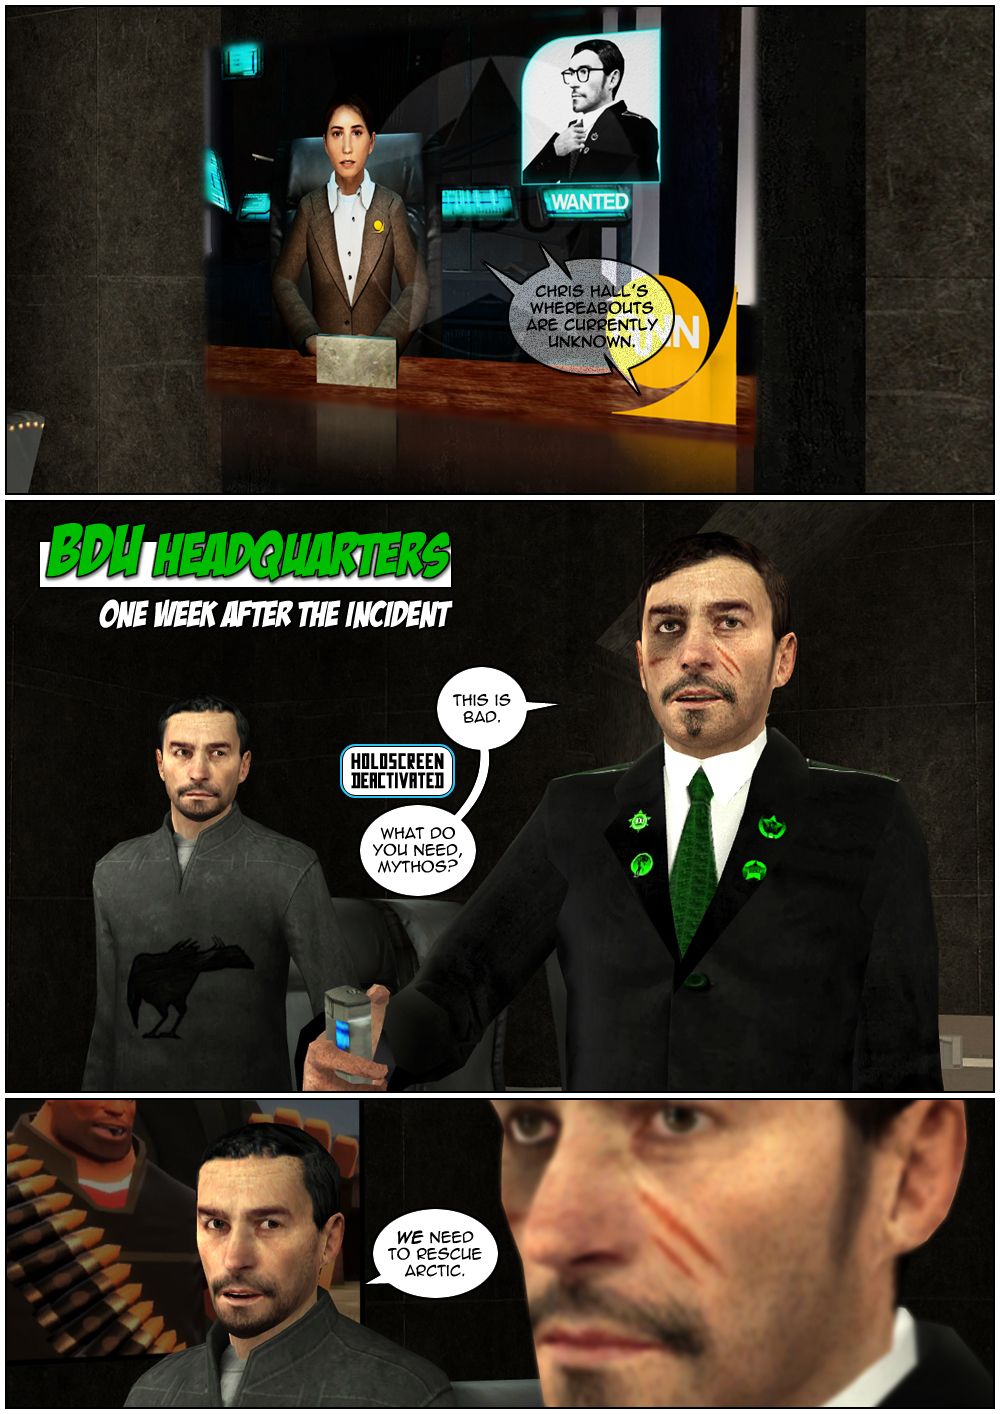 The broadcast, being displayed on a hologram, finishes with the note that Chris Hall's whereabouts are currently unknown. At the Brain Dead Union headquarters one week after the incident, a bruised and beaten up Chris deactivates the holographic screen and notes that this is bad. Mythos is standing behind him. Chris asks what he needs. Mythos tells Chris they need to rescue Arctic.